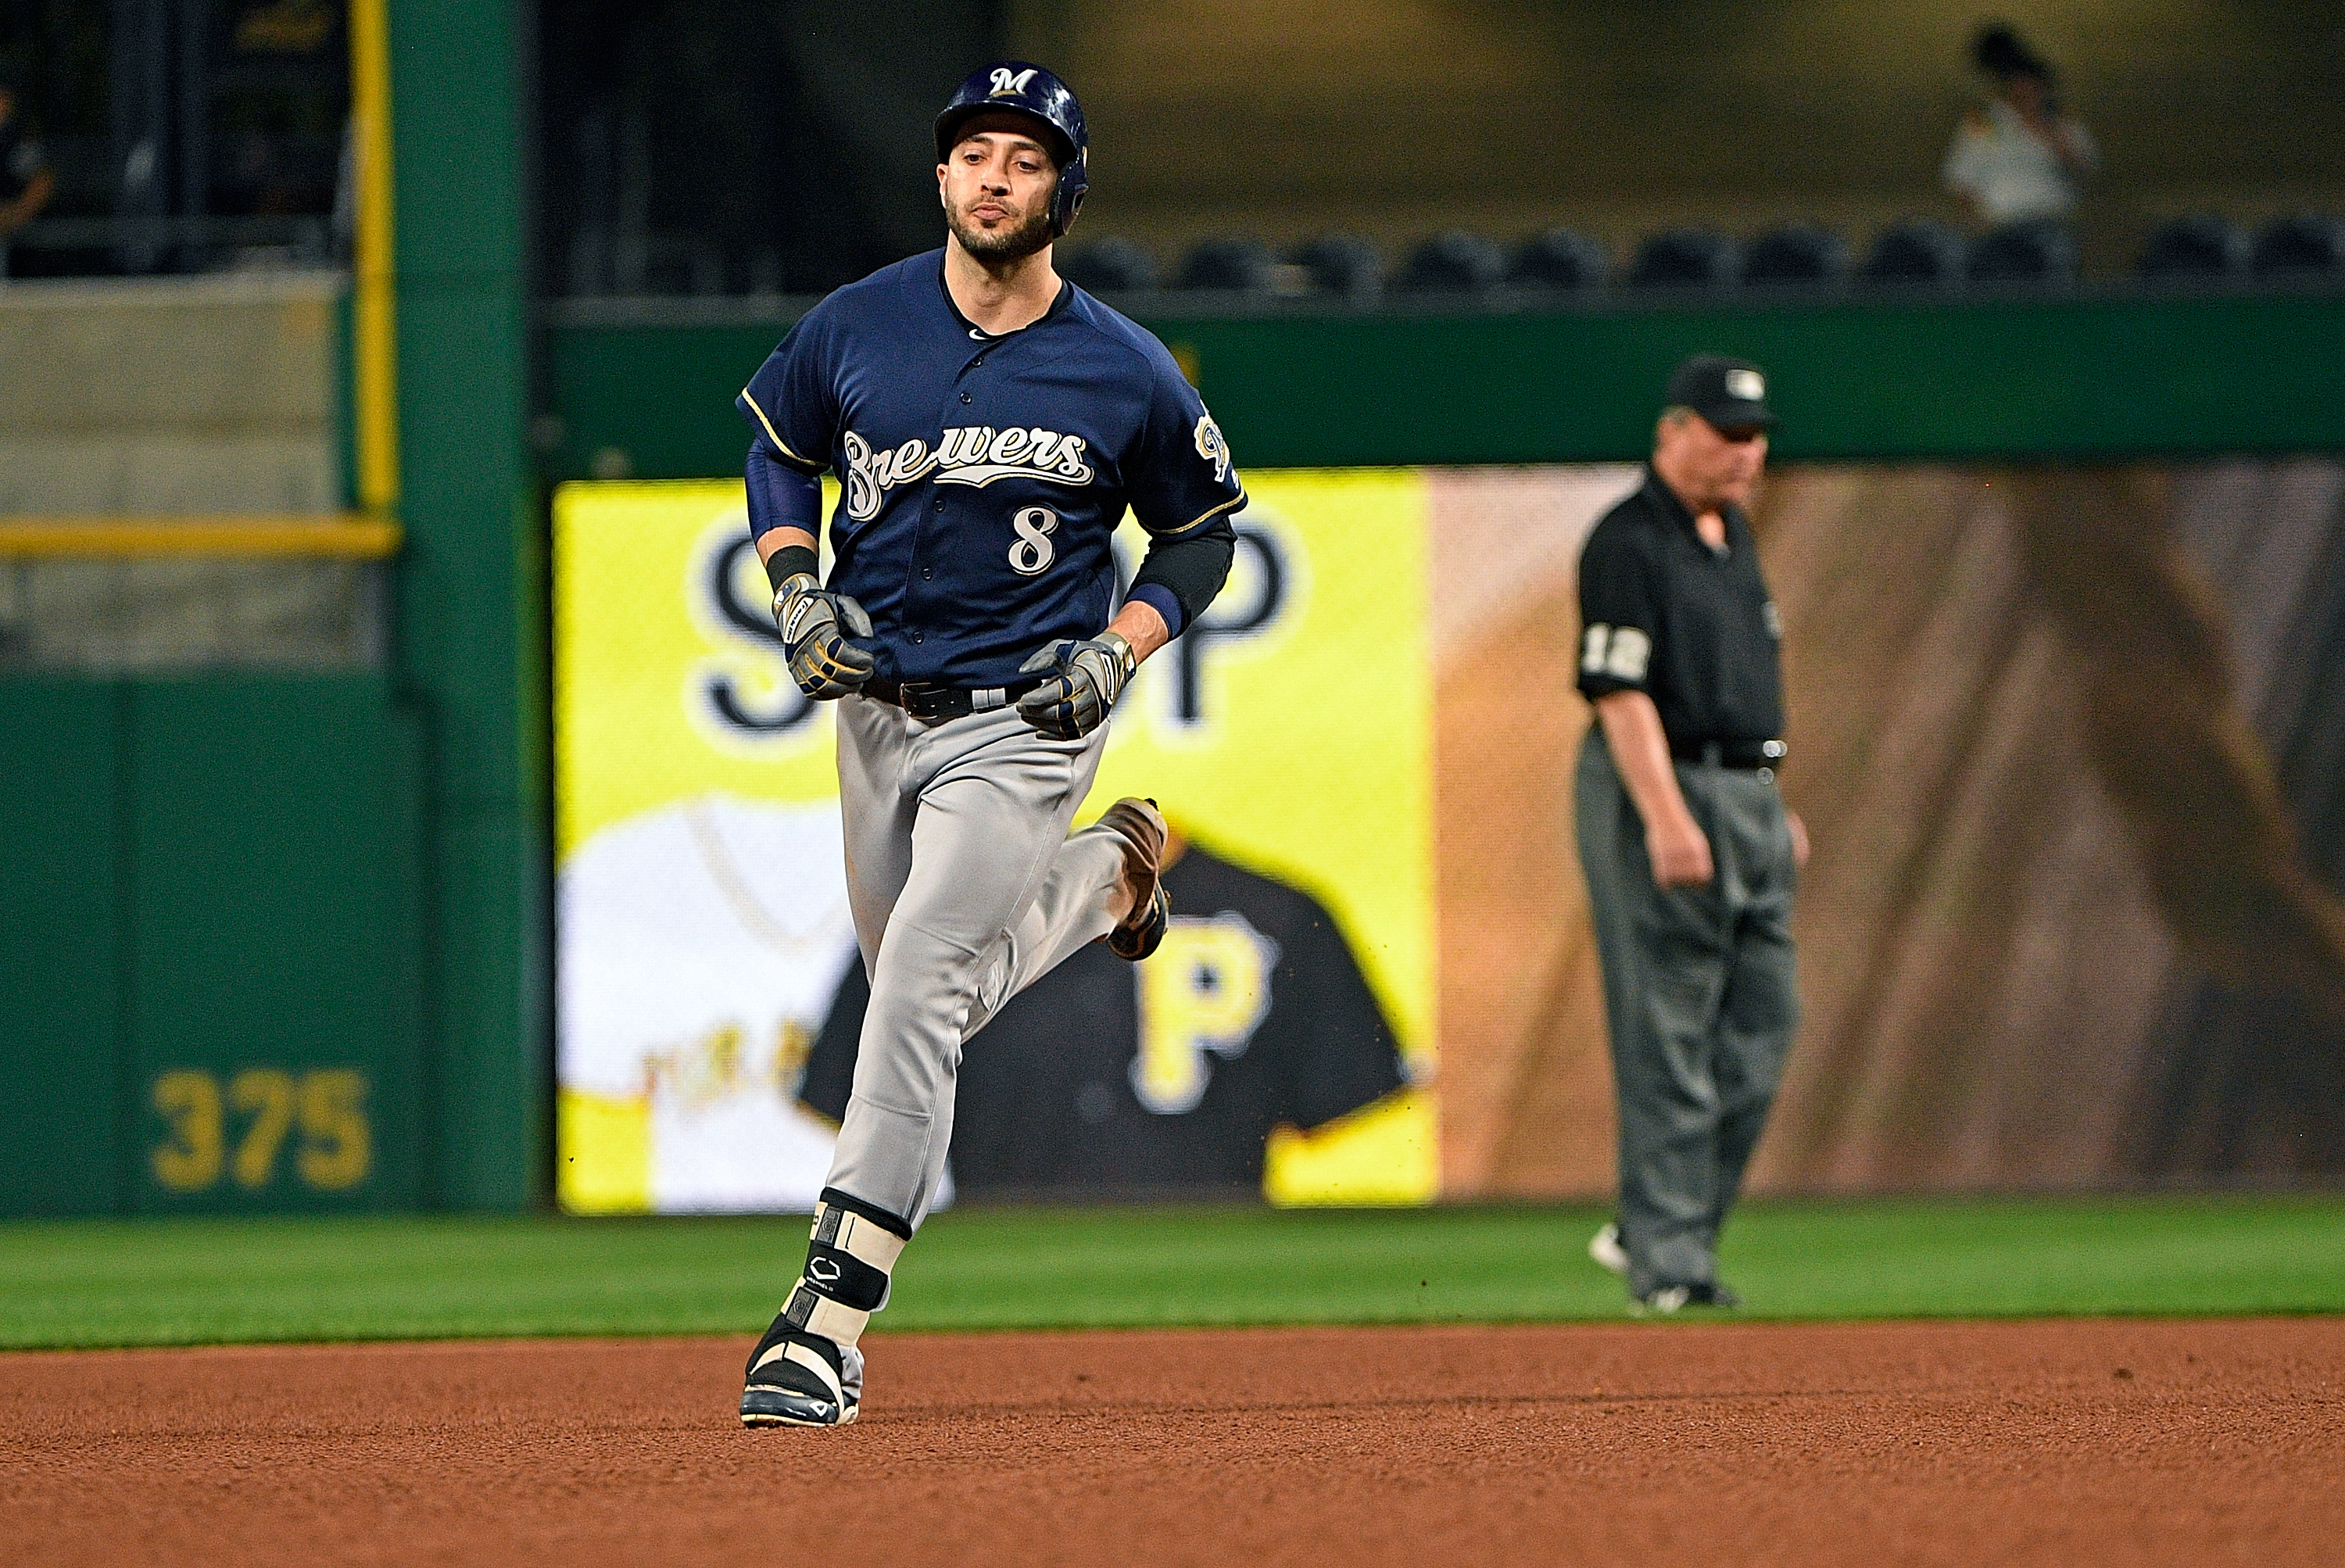 Finding Ryan Braun's role on the 2018 Brewers